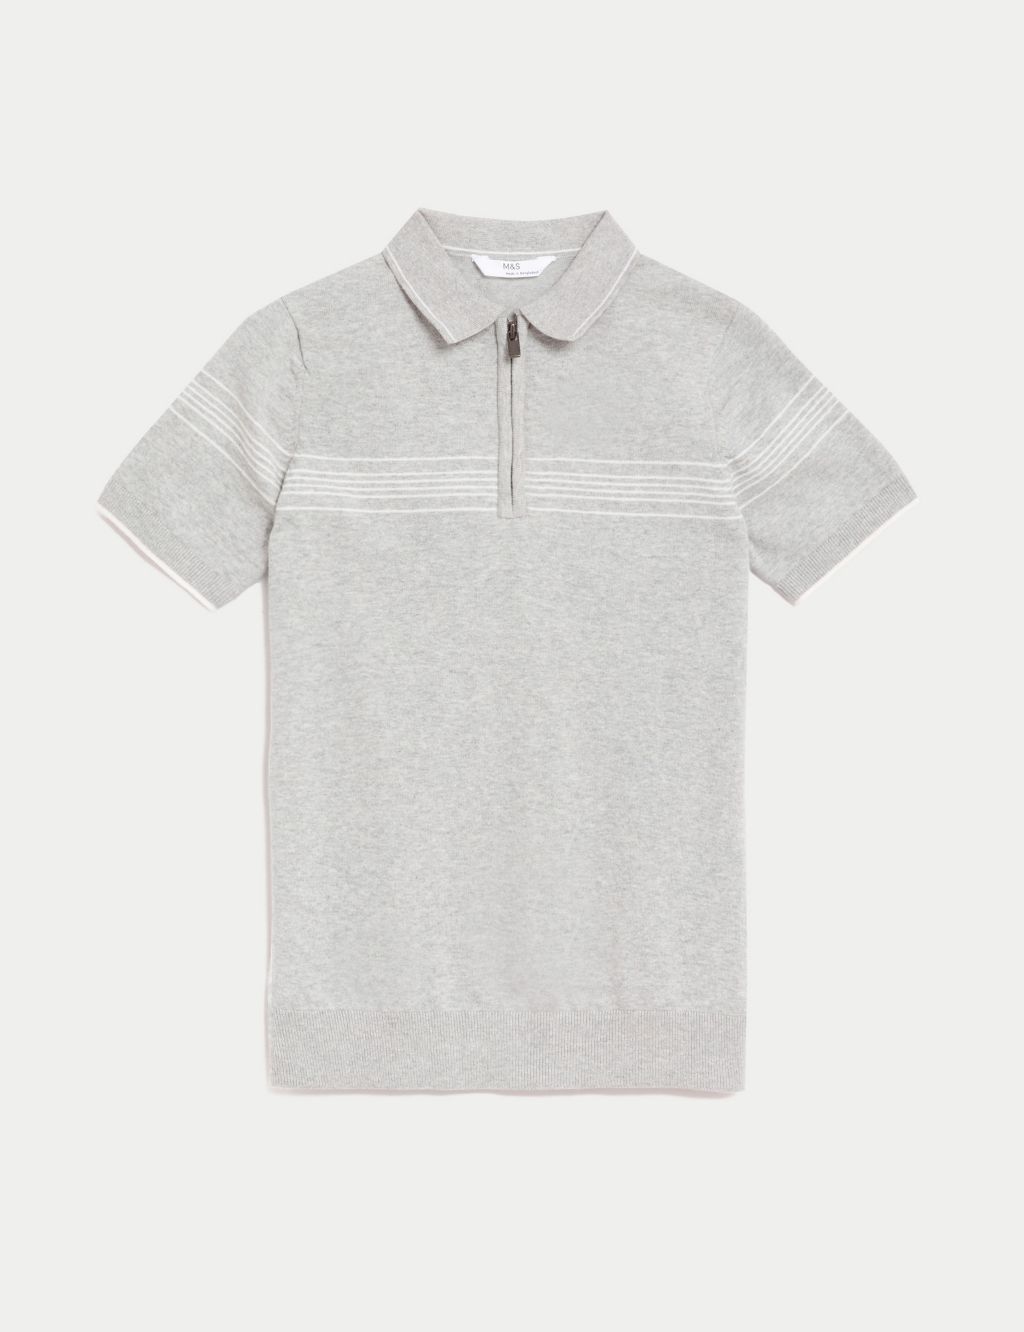 Cotton Rich Striped Knitted Polo Shirt (6-16 Yrs) image 2